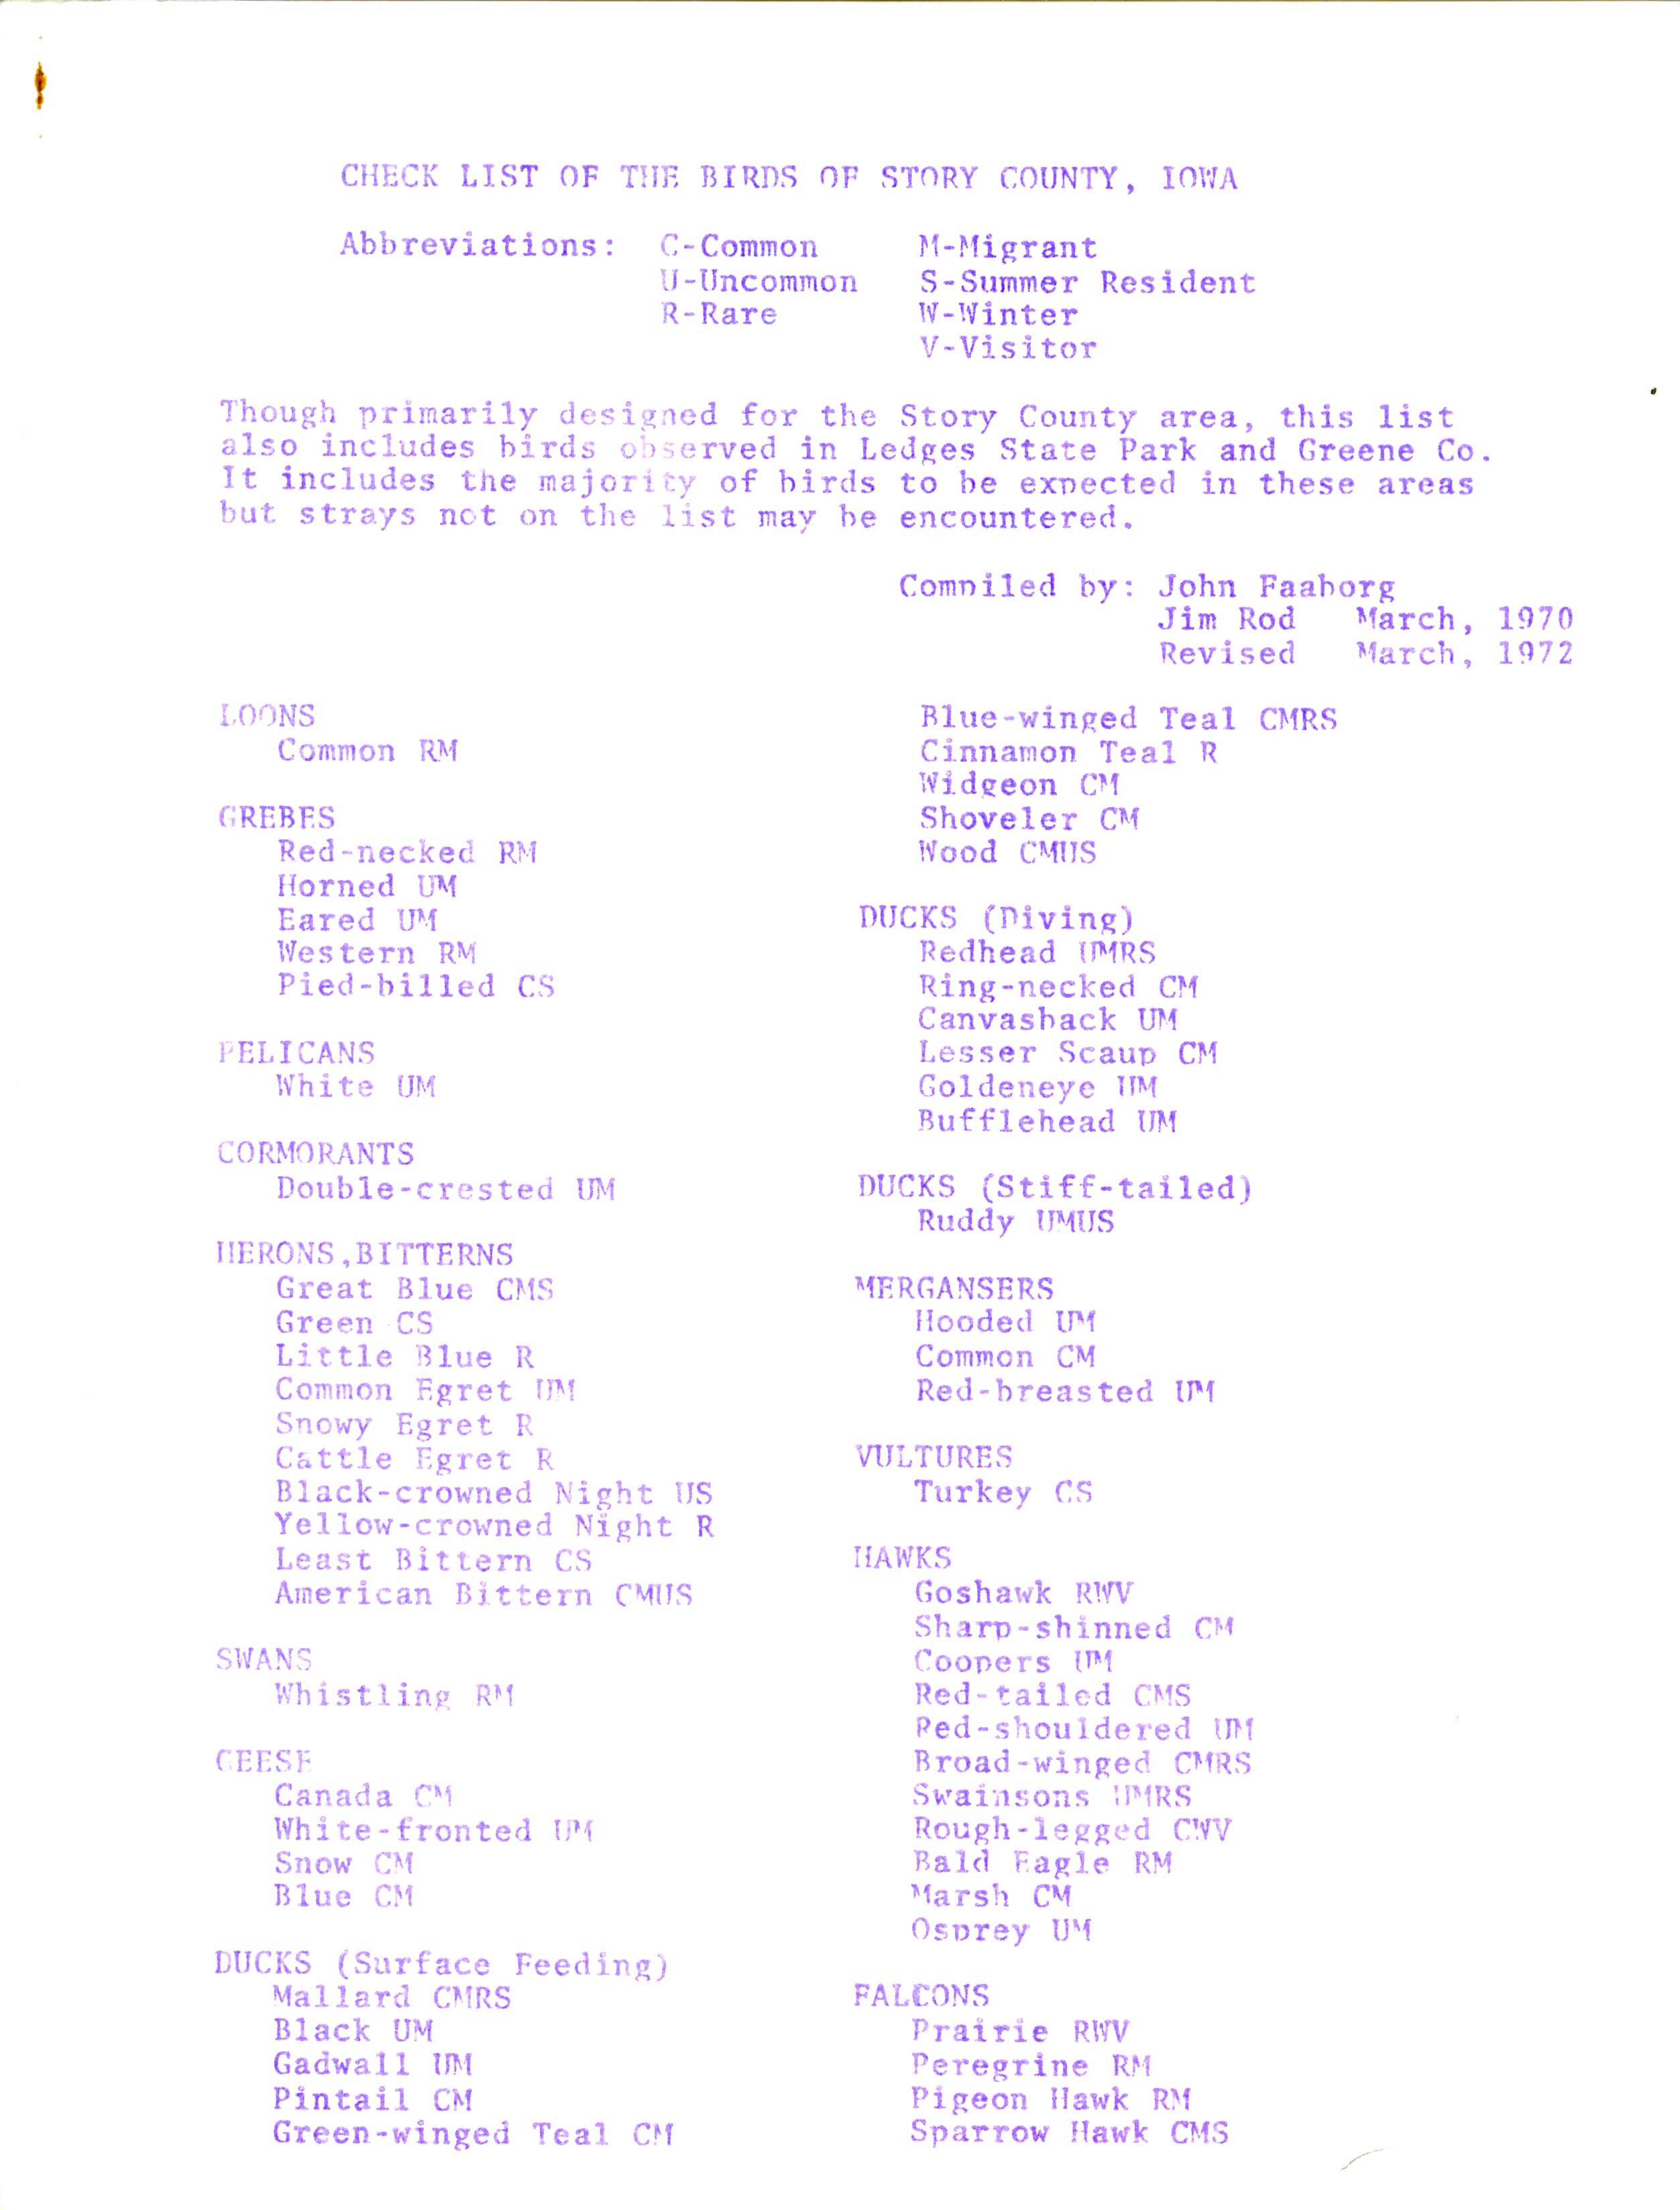 Check list of the birds of Story County, Iowa, revised 1972